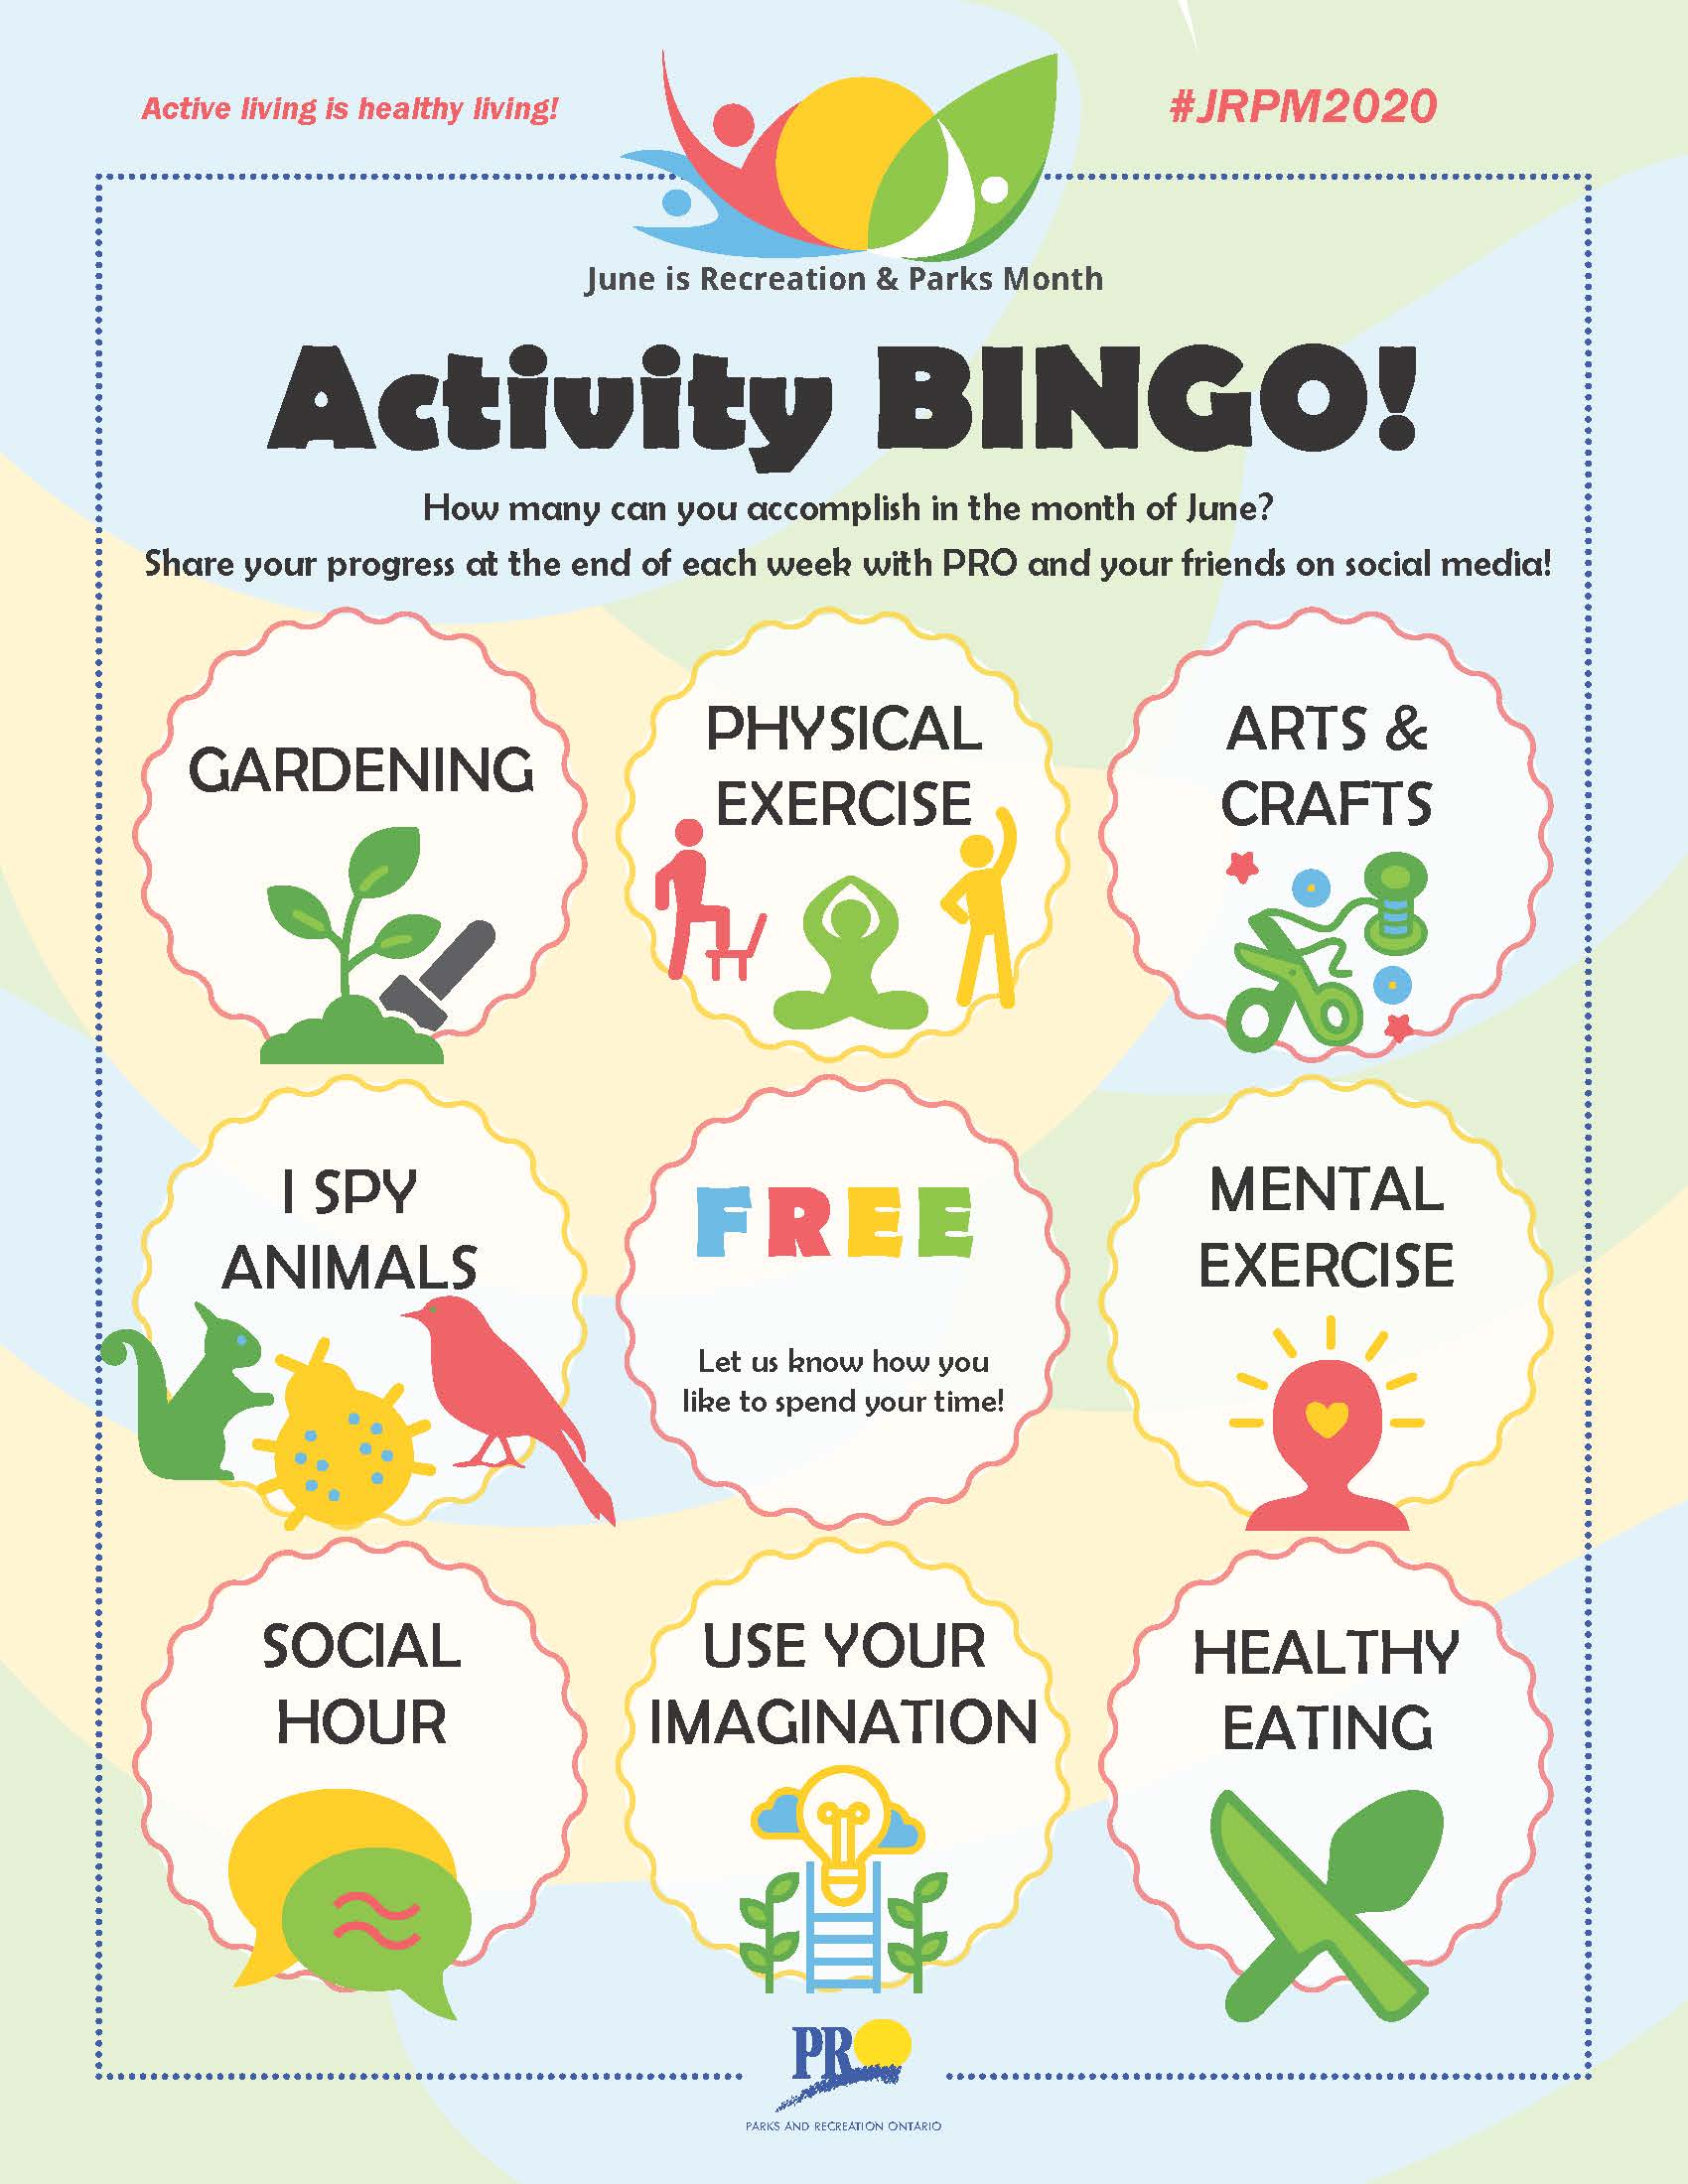 Activity Bingo: How may can you accomplish in the month of June?